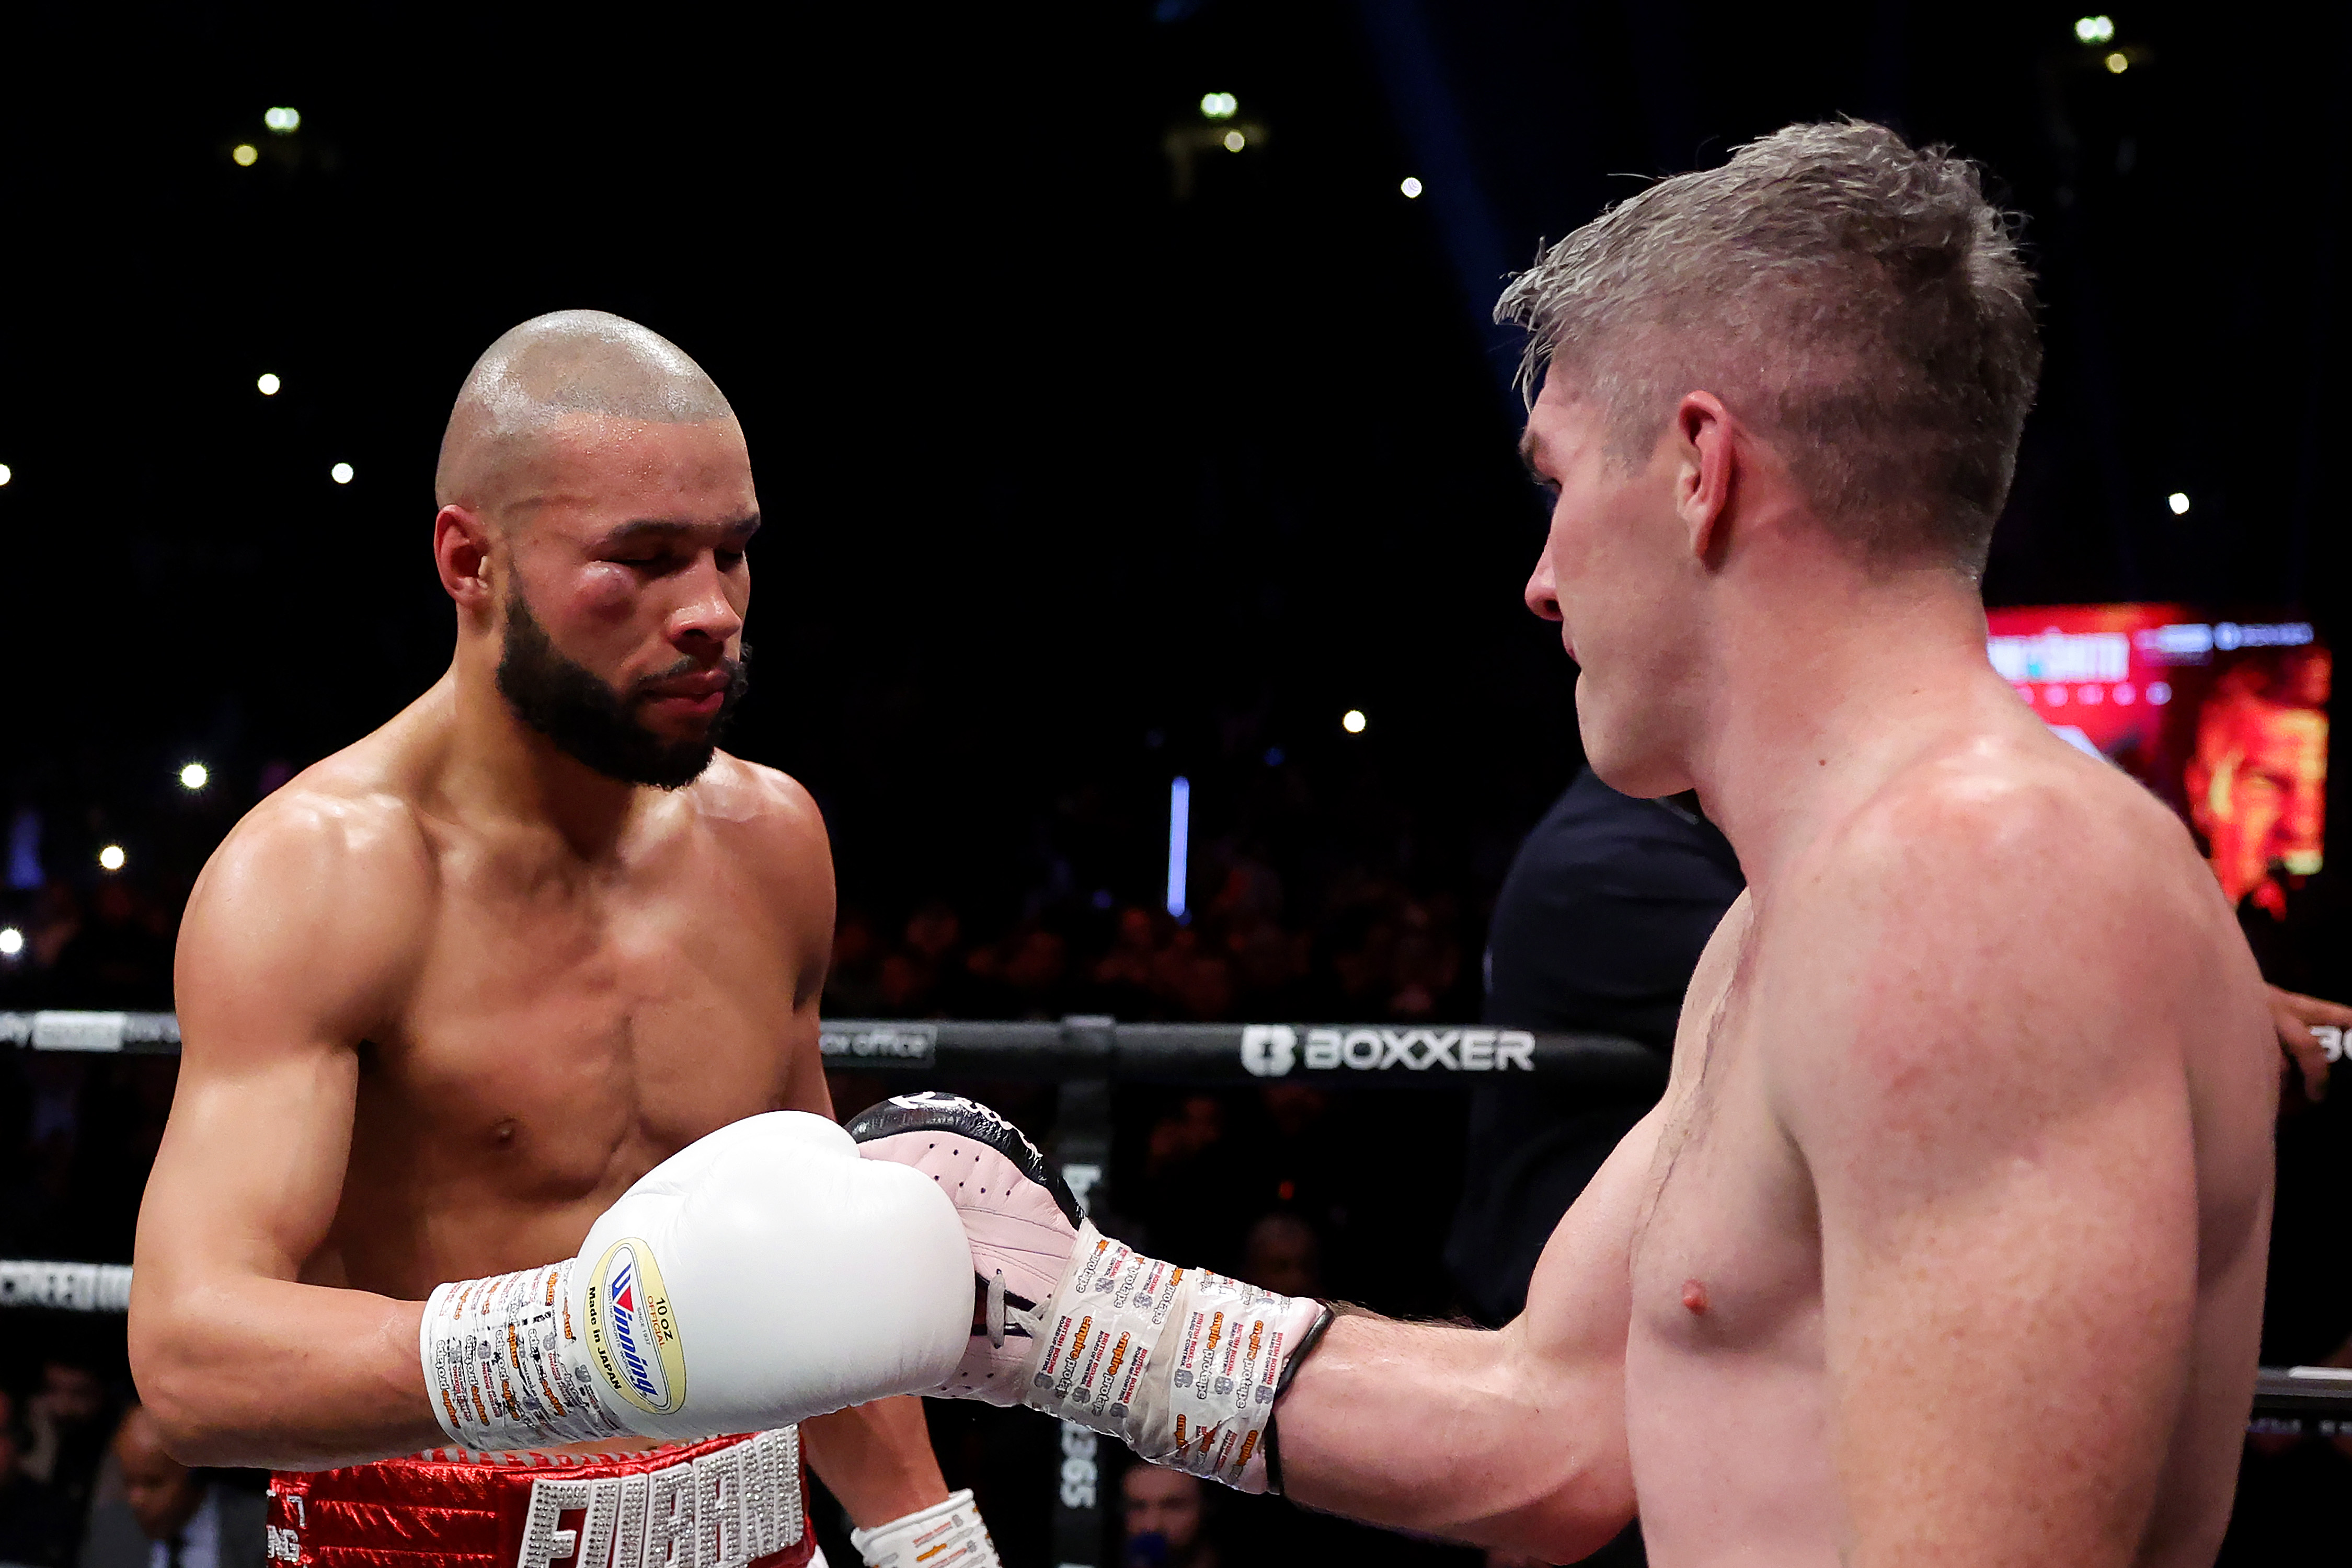 Chris Eubank Jr was said to have his pride hurt by the loss to Smith, and will look for vindication.